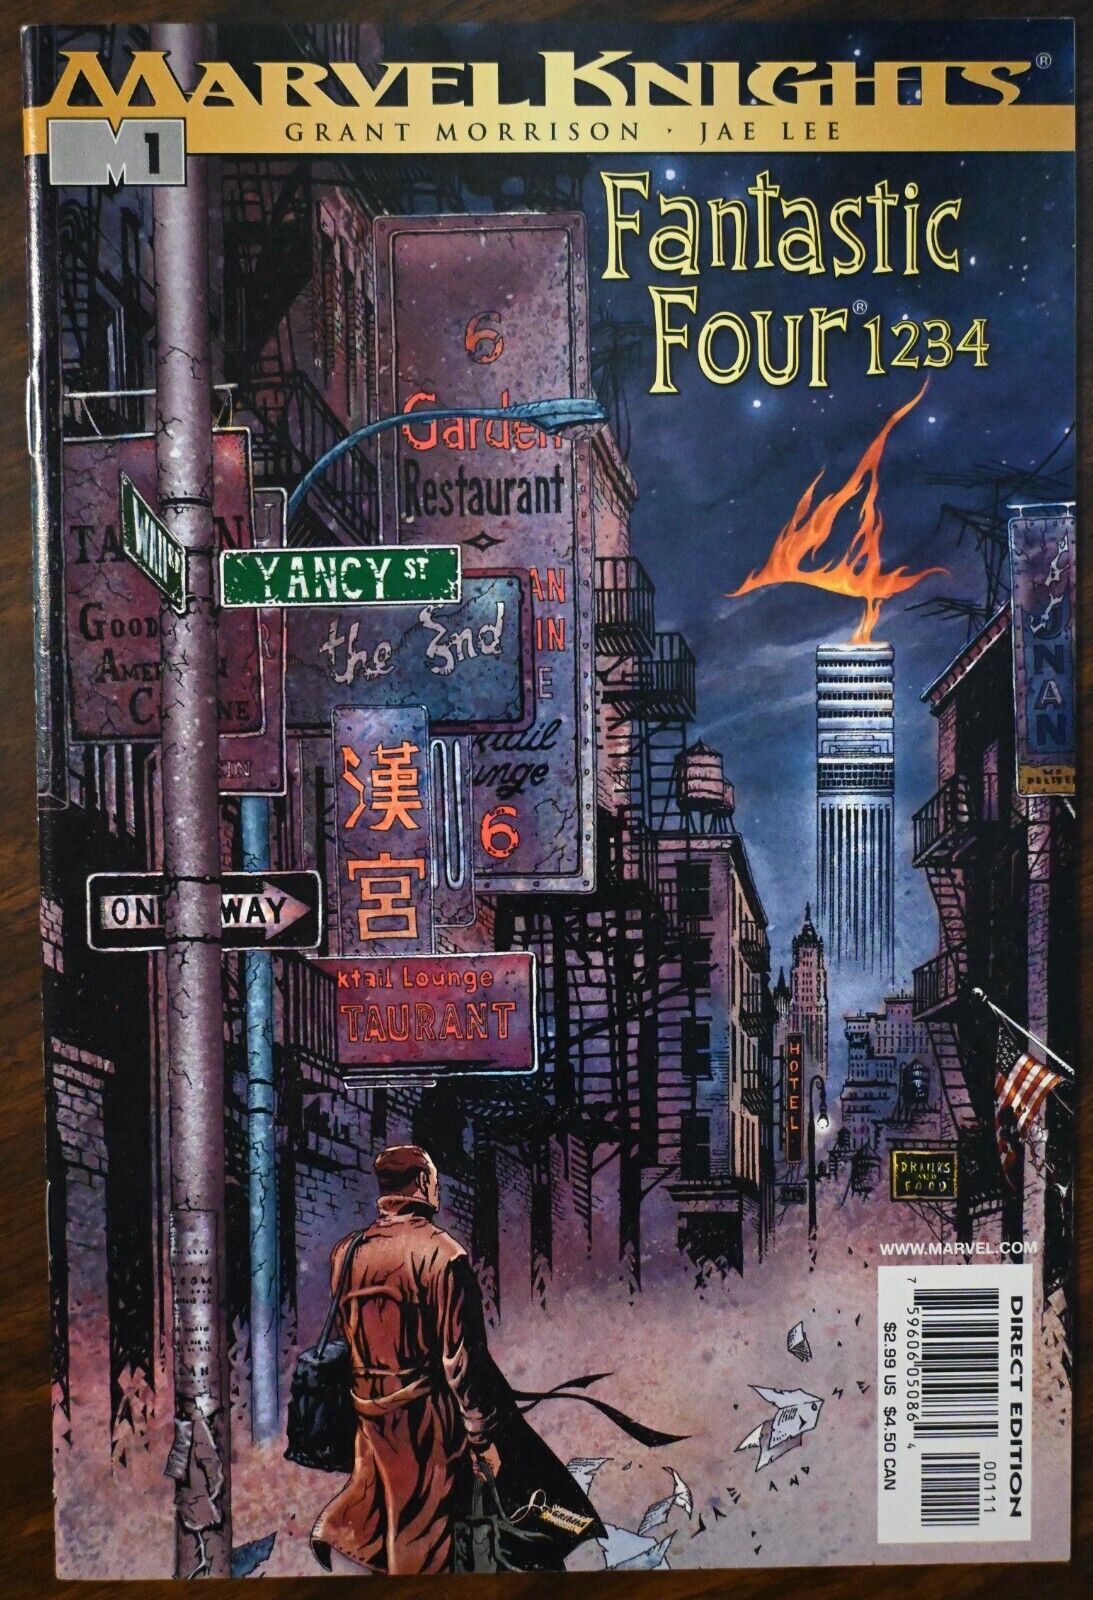 MARVEL Comic (2001) - Fantastic Four 1234 #1 - Chinatown Yancy Street Cover